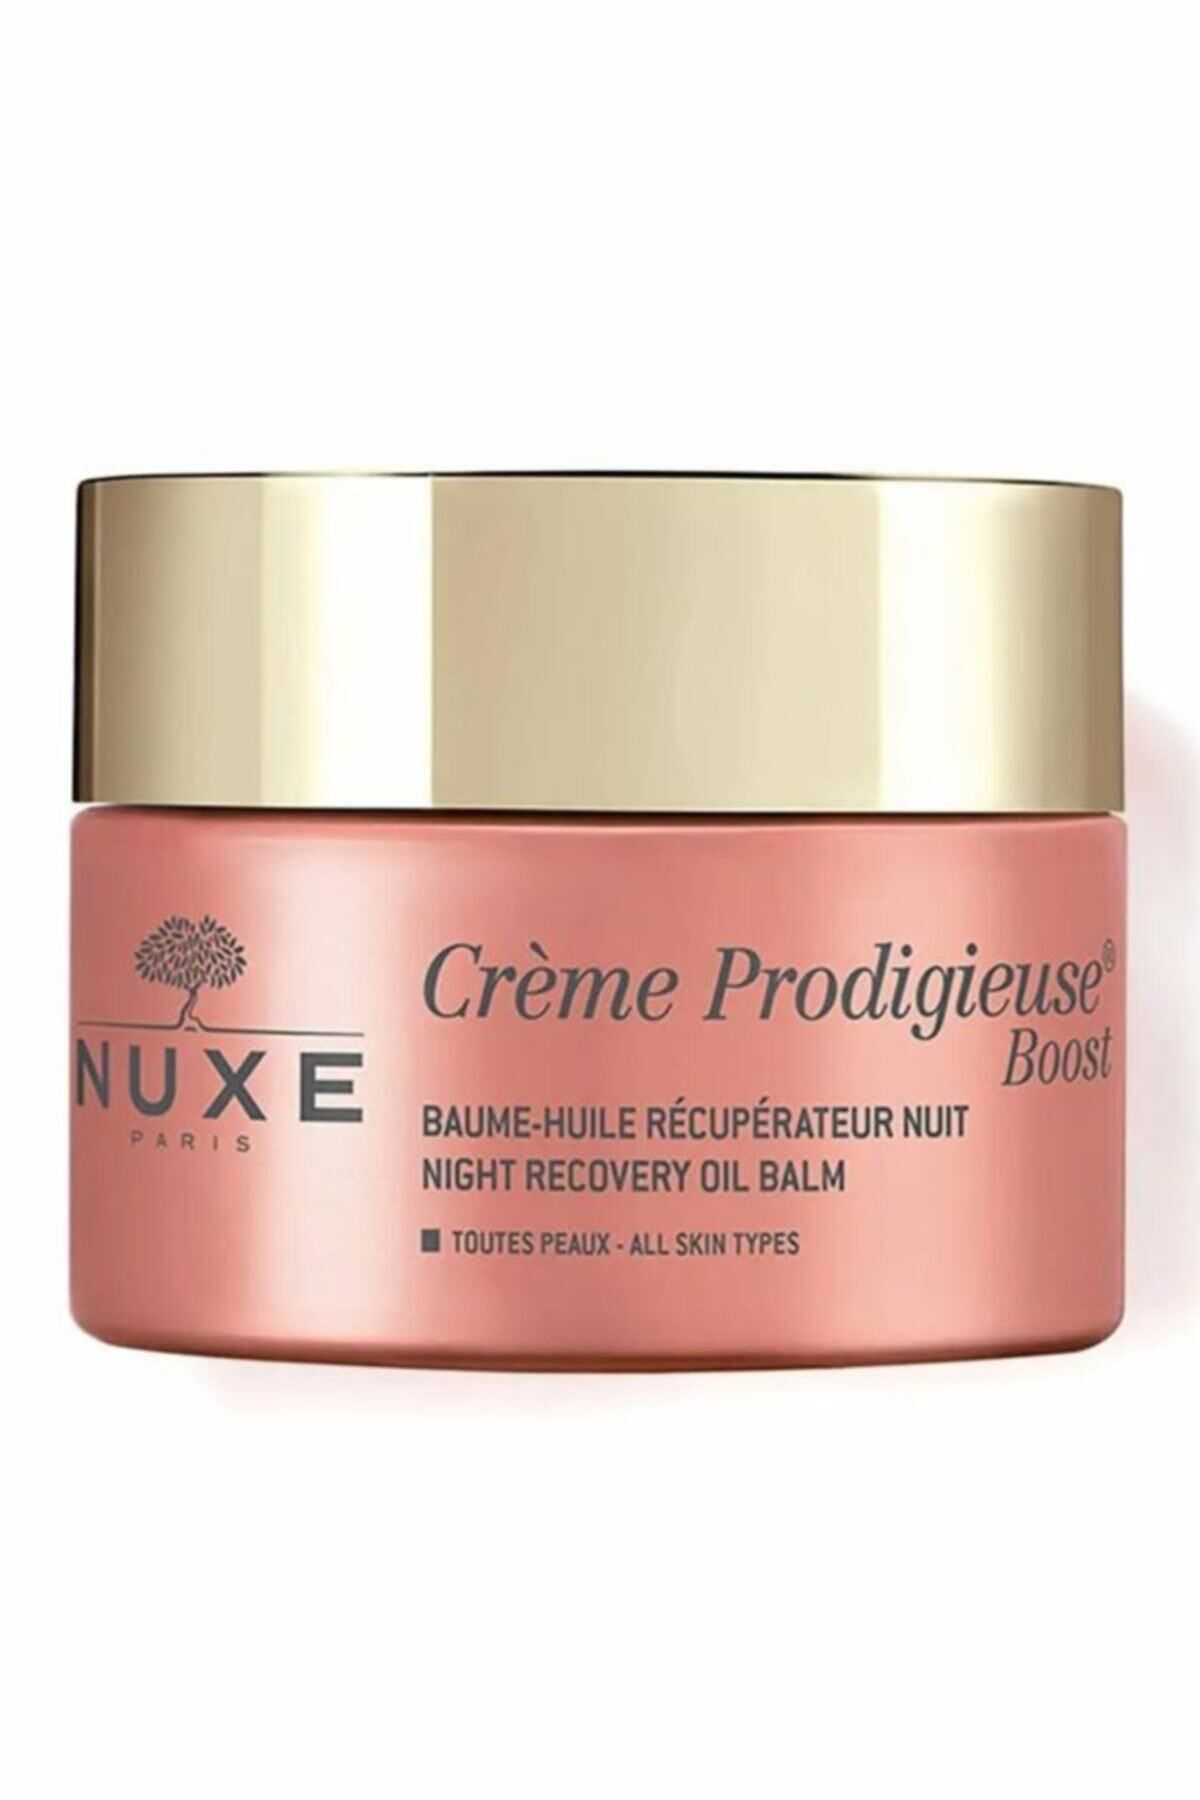 Nuxe Creme Prodigieuse Boost Night Recovery Oil Balm 50 Ml